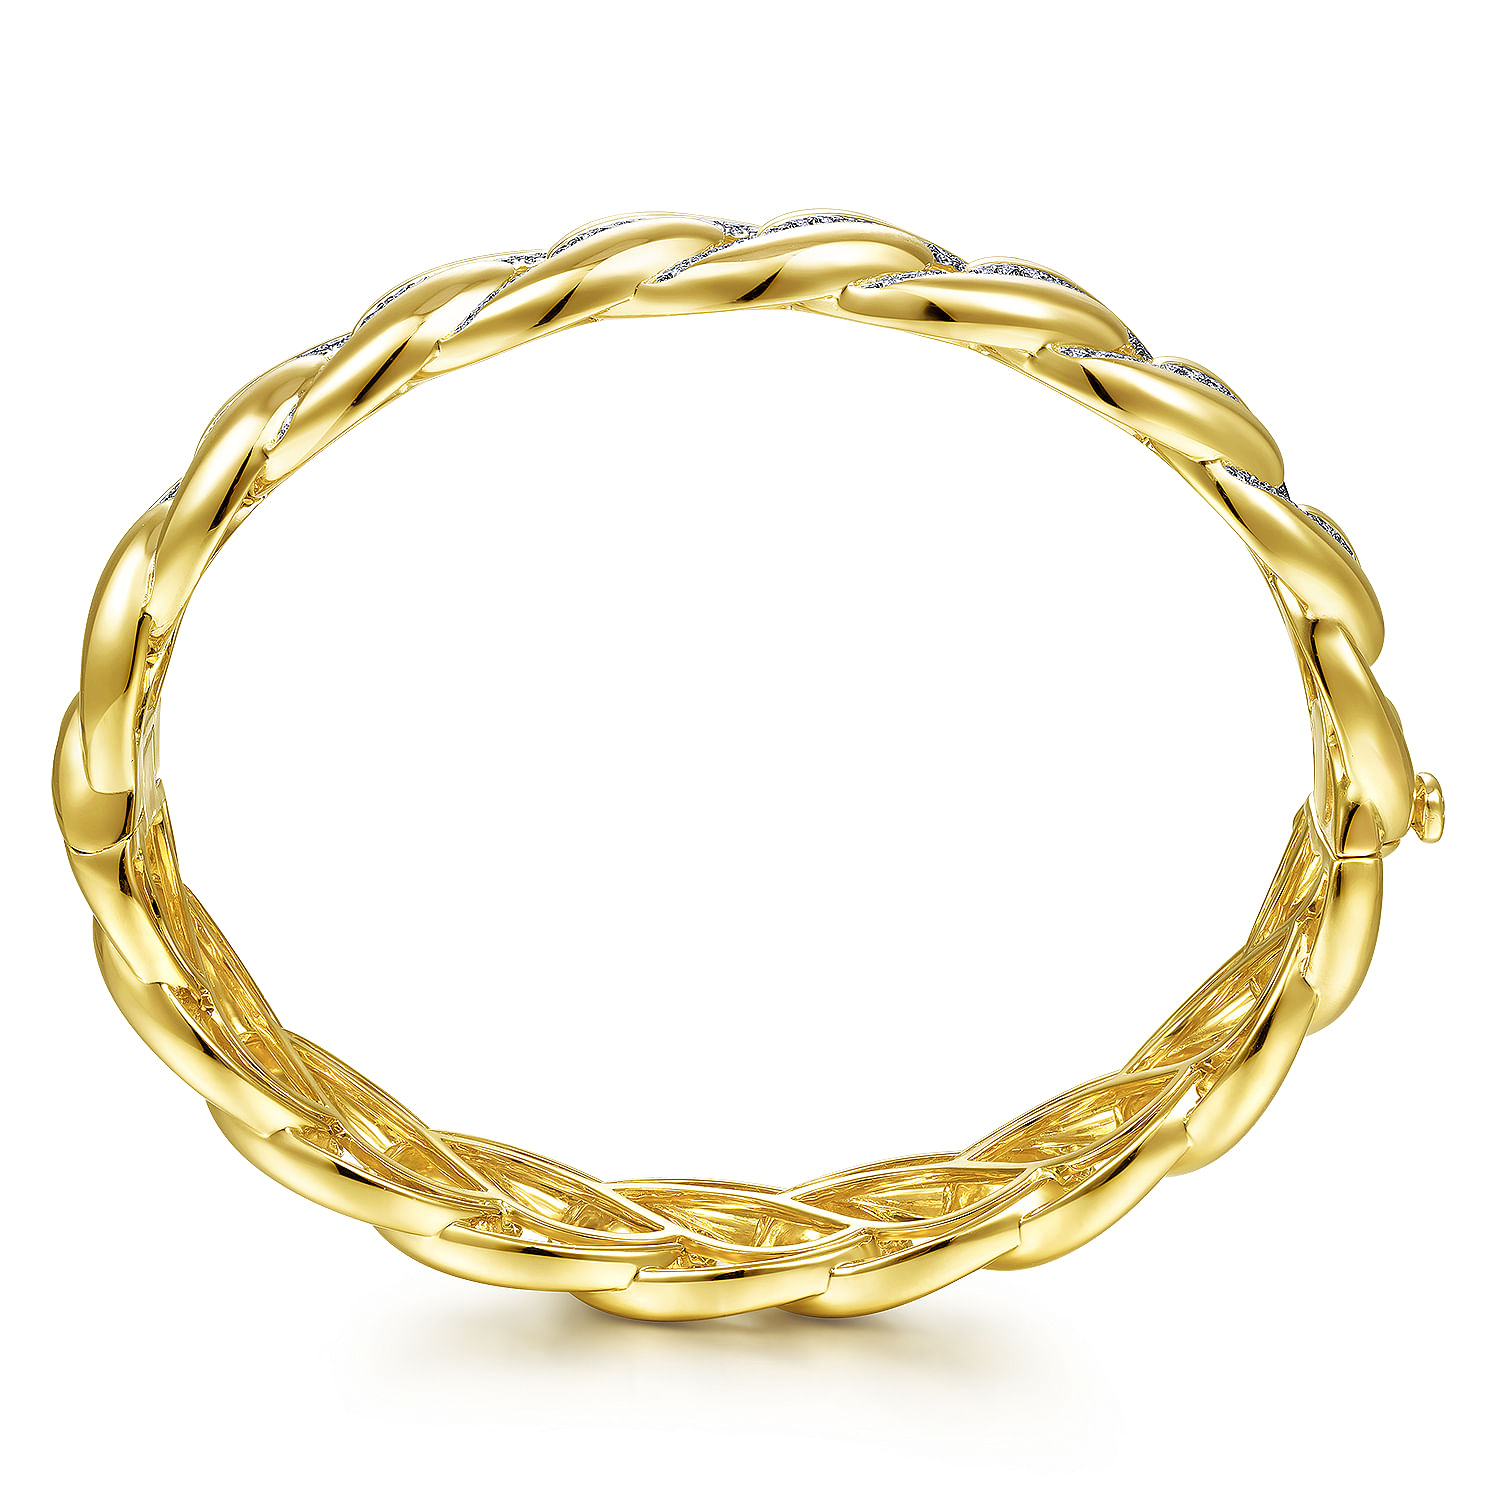 14K Yellow Gold Chain Link Bangle with Diamond Pavé Stations